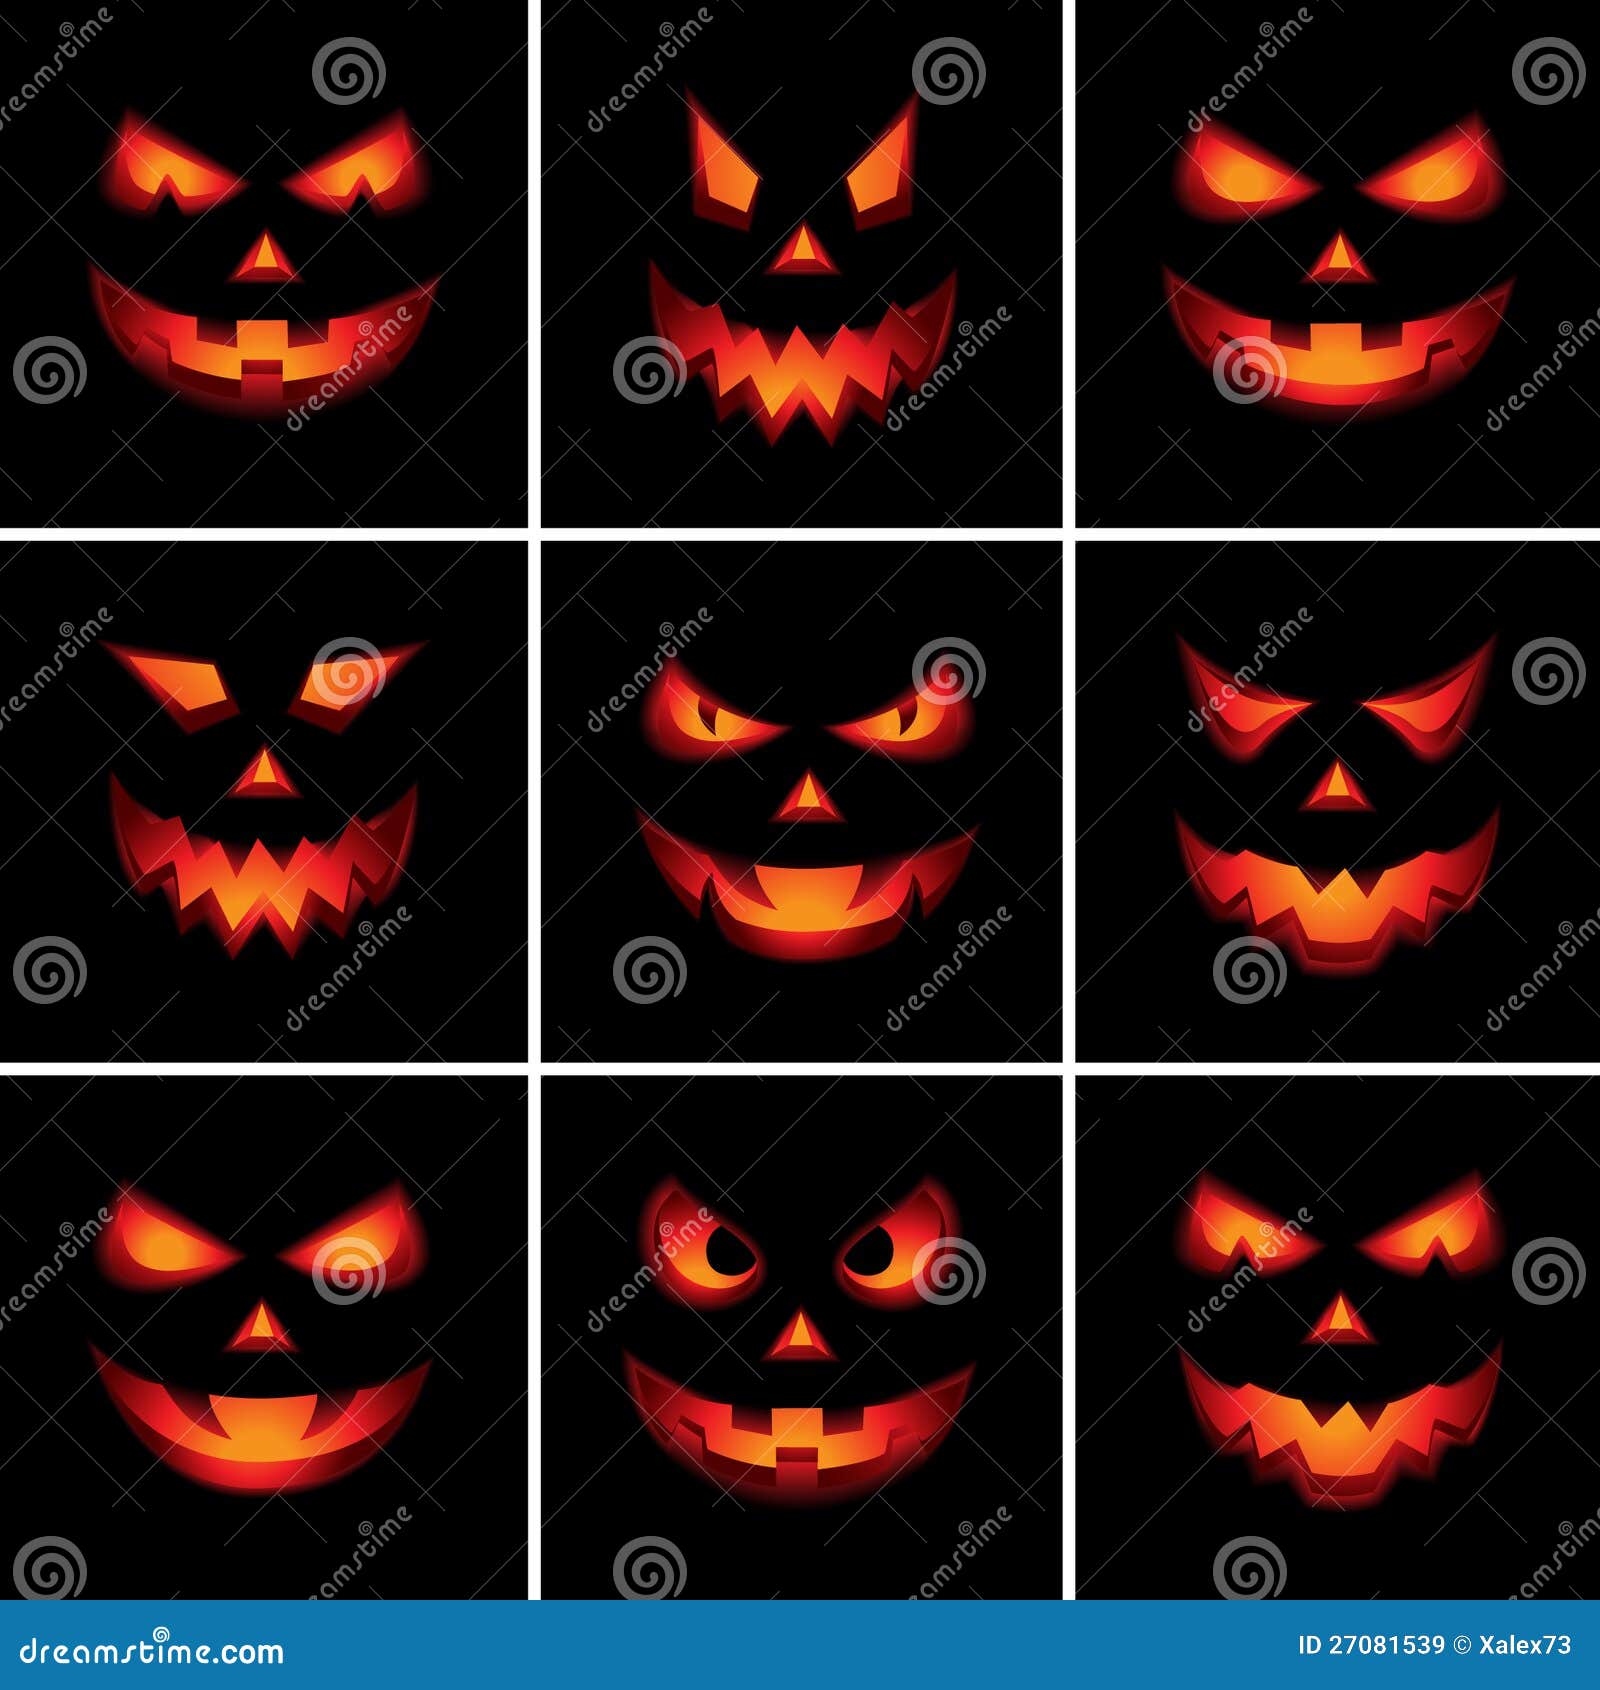 Jack O Lantern Scary Faces Stock Vector Illustration Of Creative 27081539,Gas Dryer Vs Electric Dryer